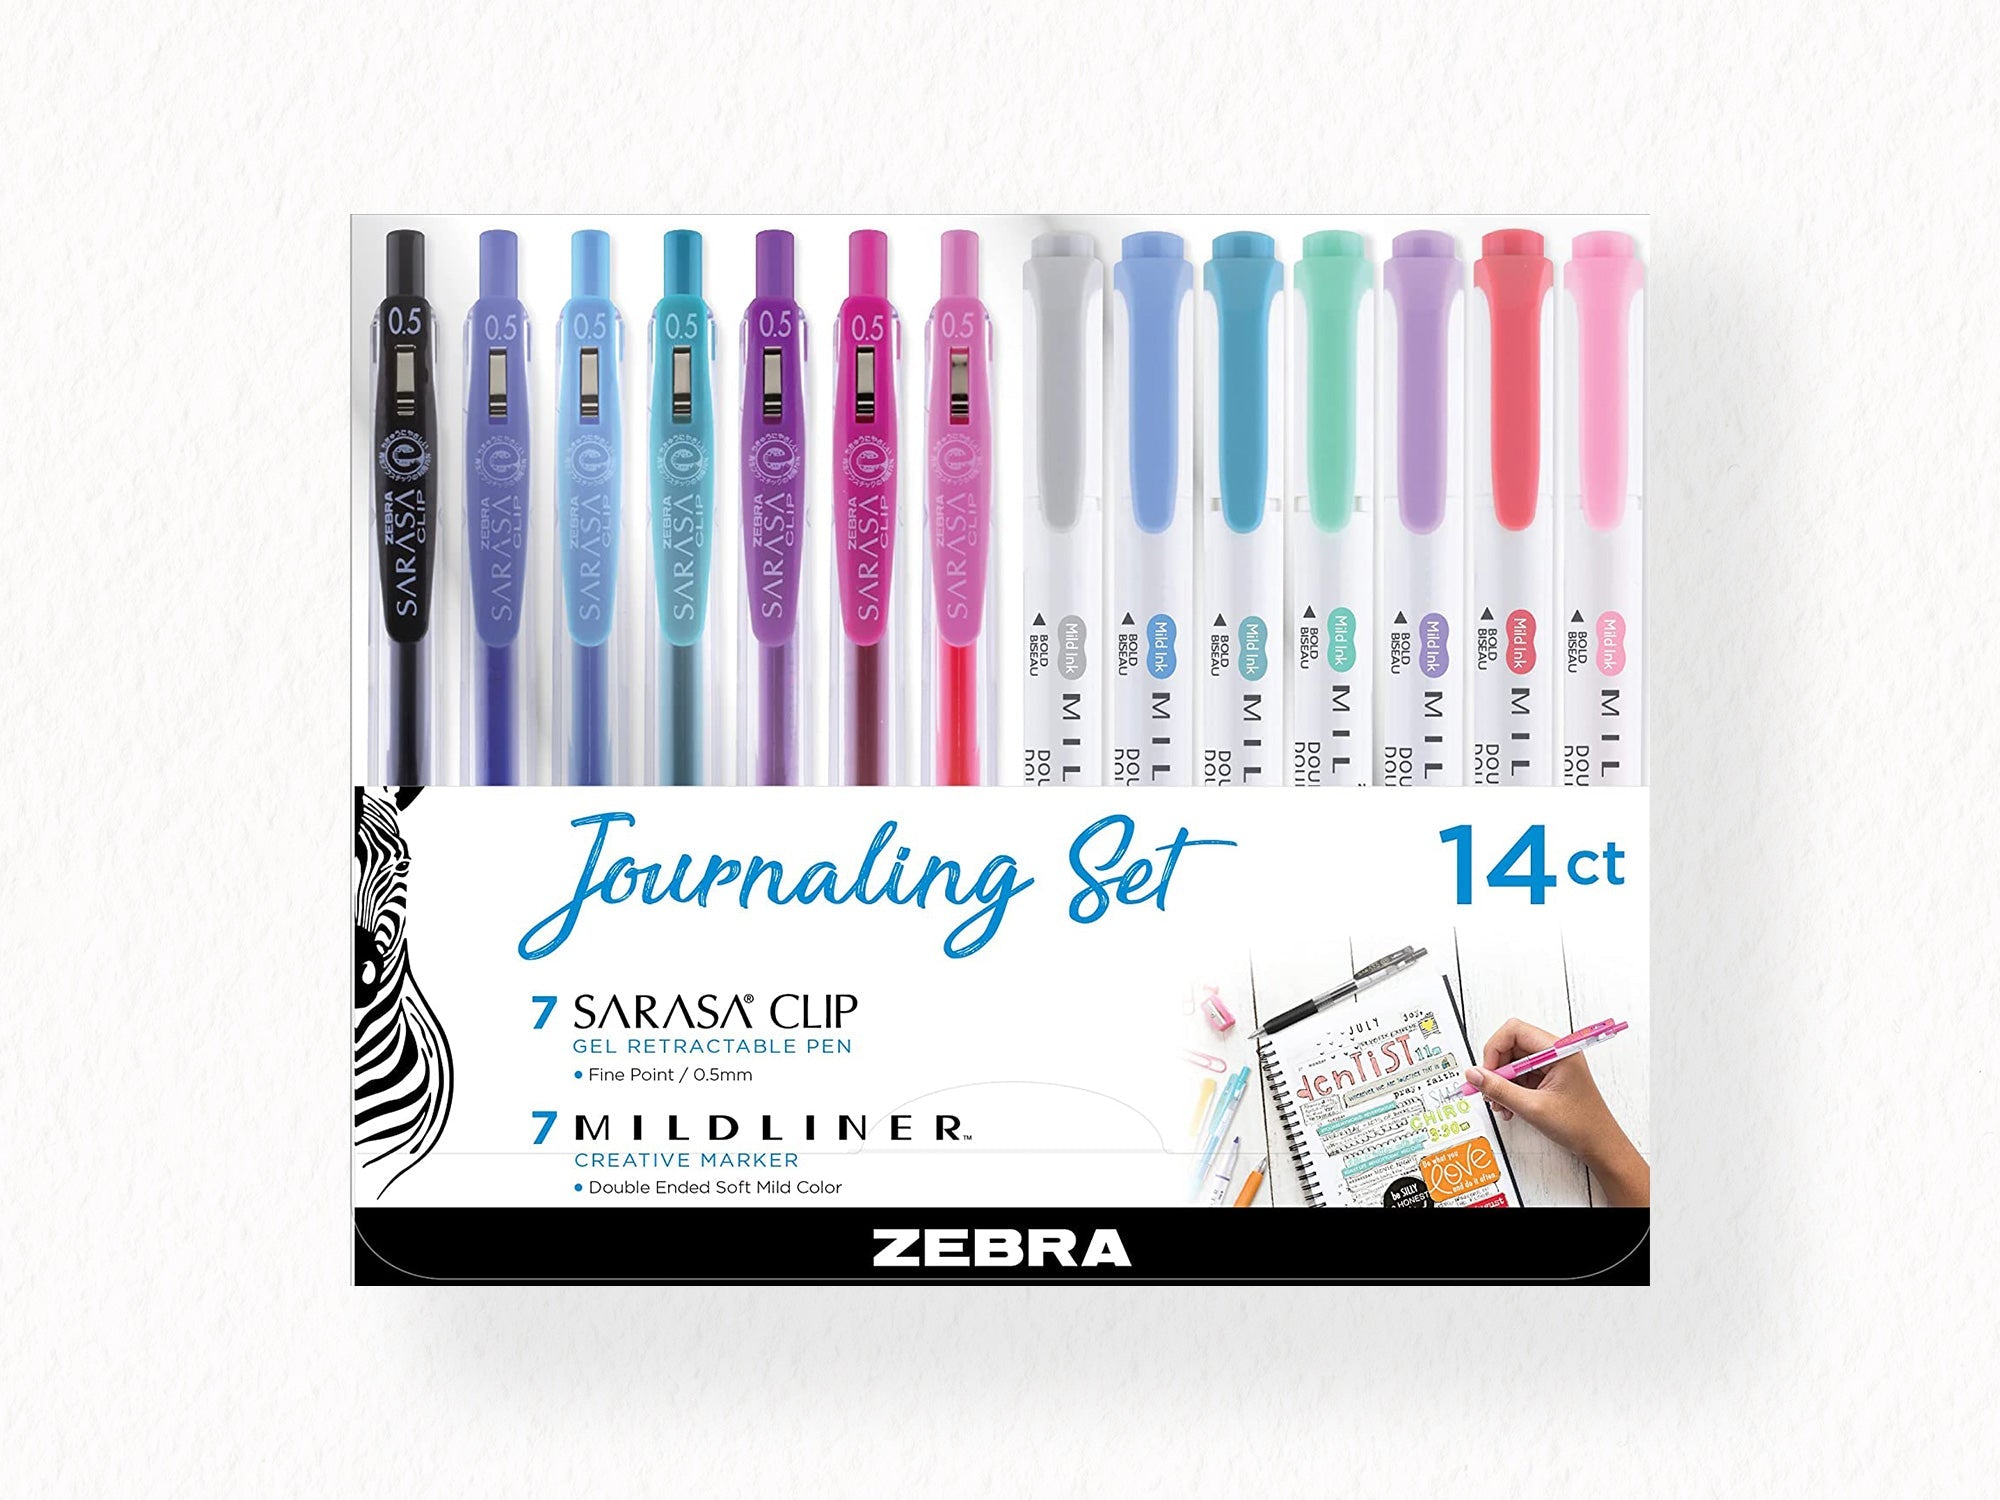 Zebra Midliner Brush Markers on clearance at Target right now! 50% off :  r/bulletjournal